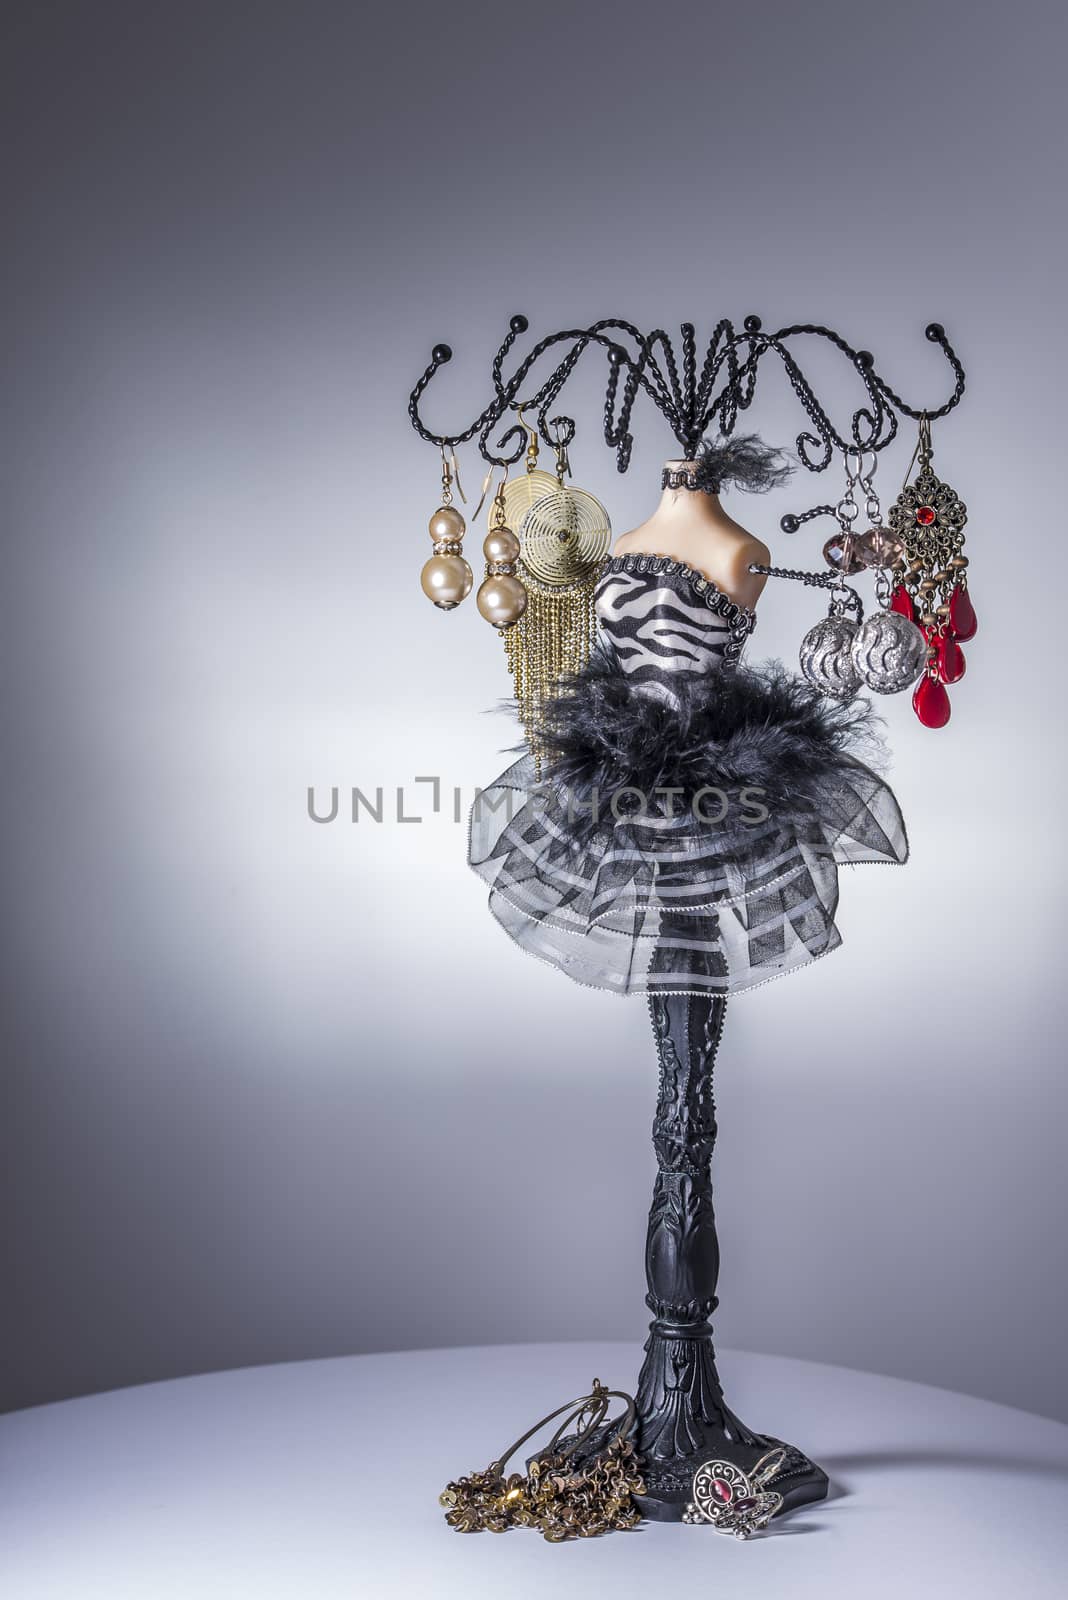 Black jewelery display stand / hanger in form of a woman’s bust in black and white dress with metallic arms as holders